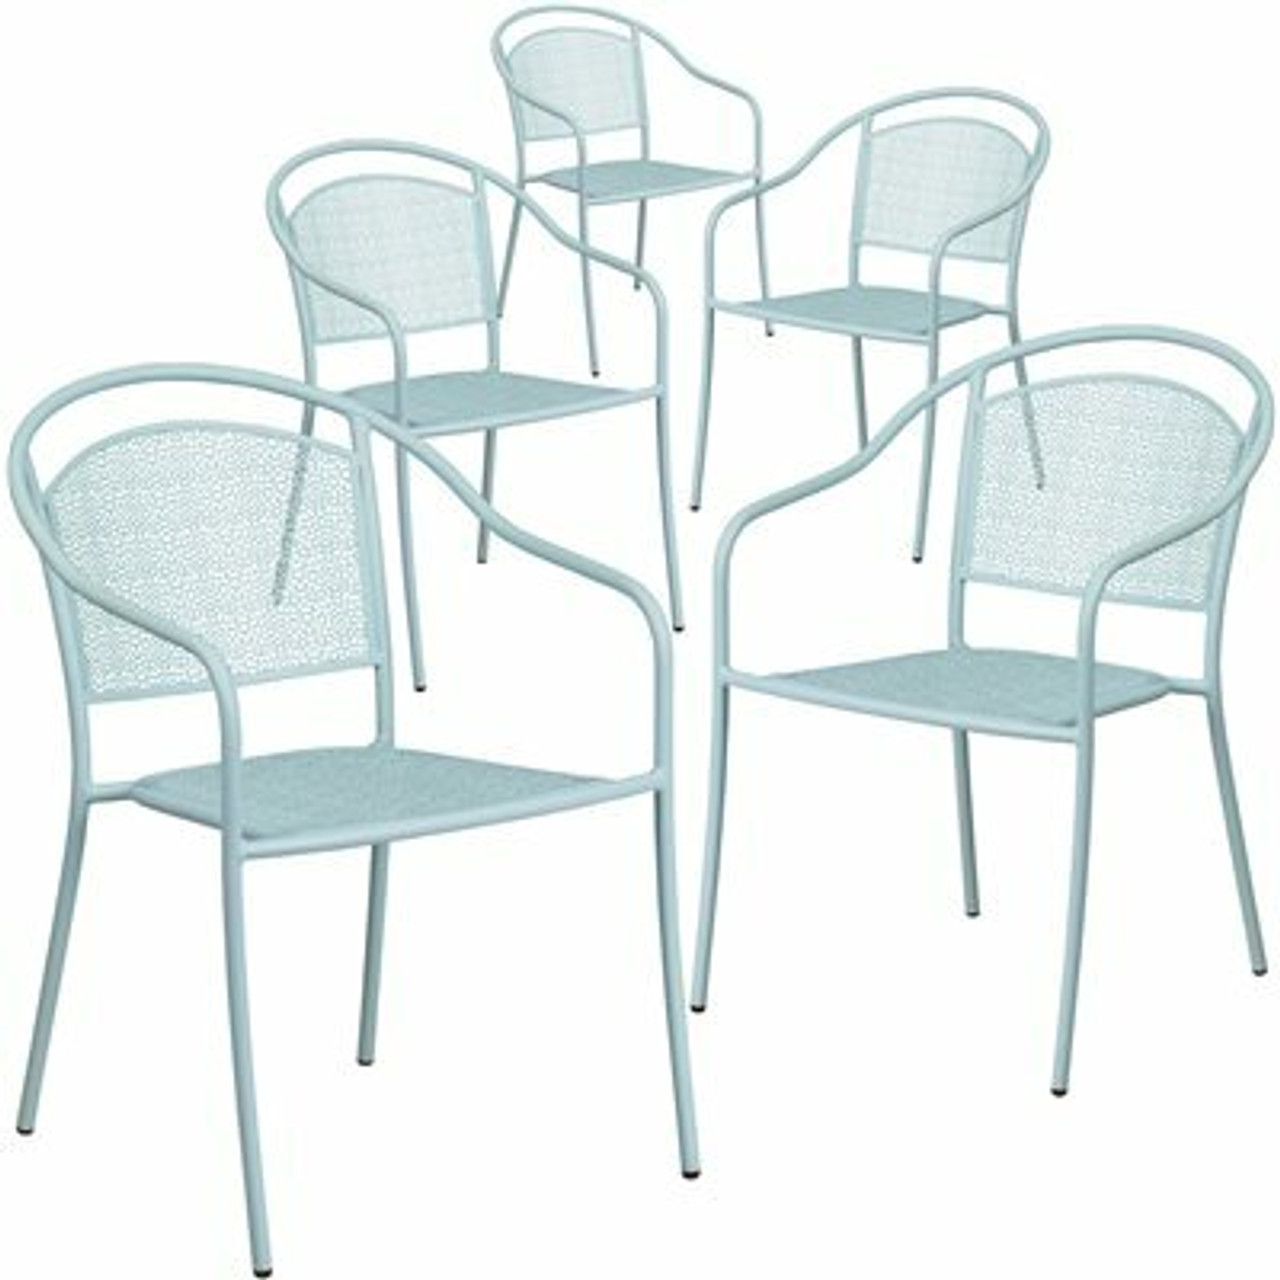 Carnegy Avenue Stackable Metal Outdoor Dining Chair In Sky Blue (Set Of 5) - 311287409